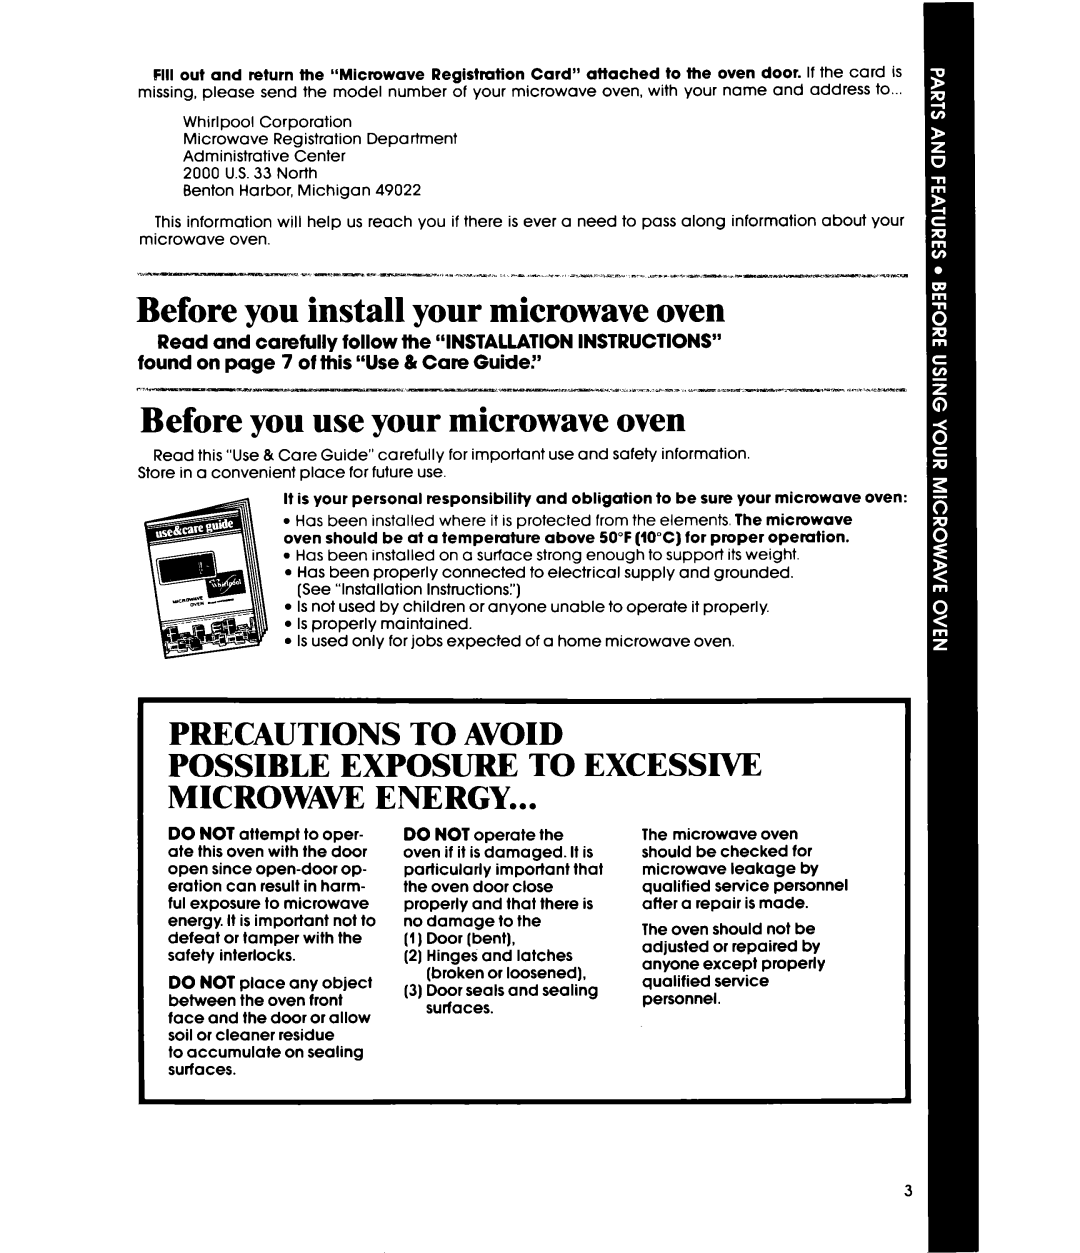 Whirlpool MW1200XP manual Before you install your microwave oven, Before you use your microwave oven, Precautions To Avoid 